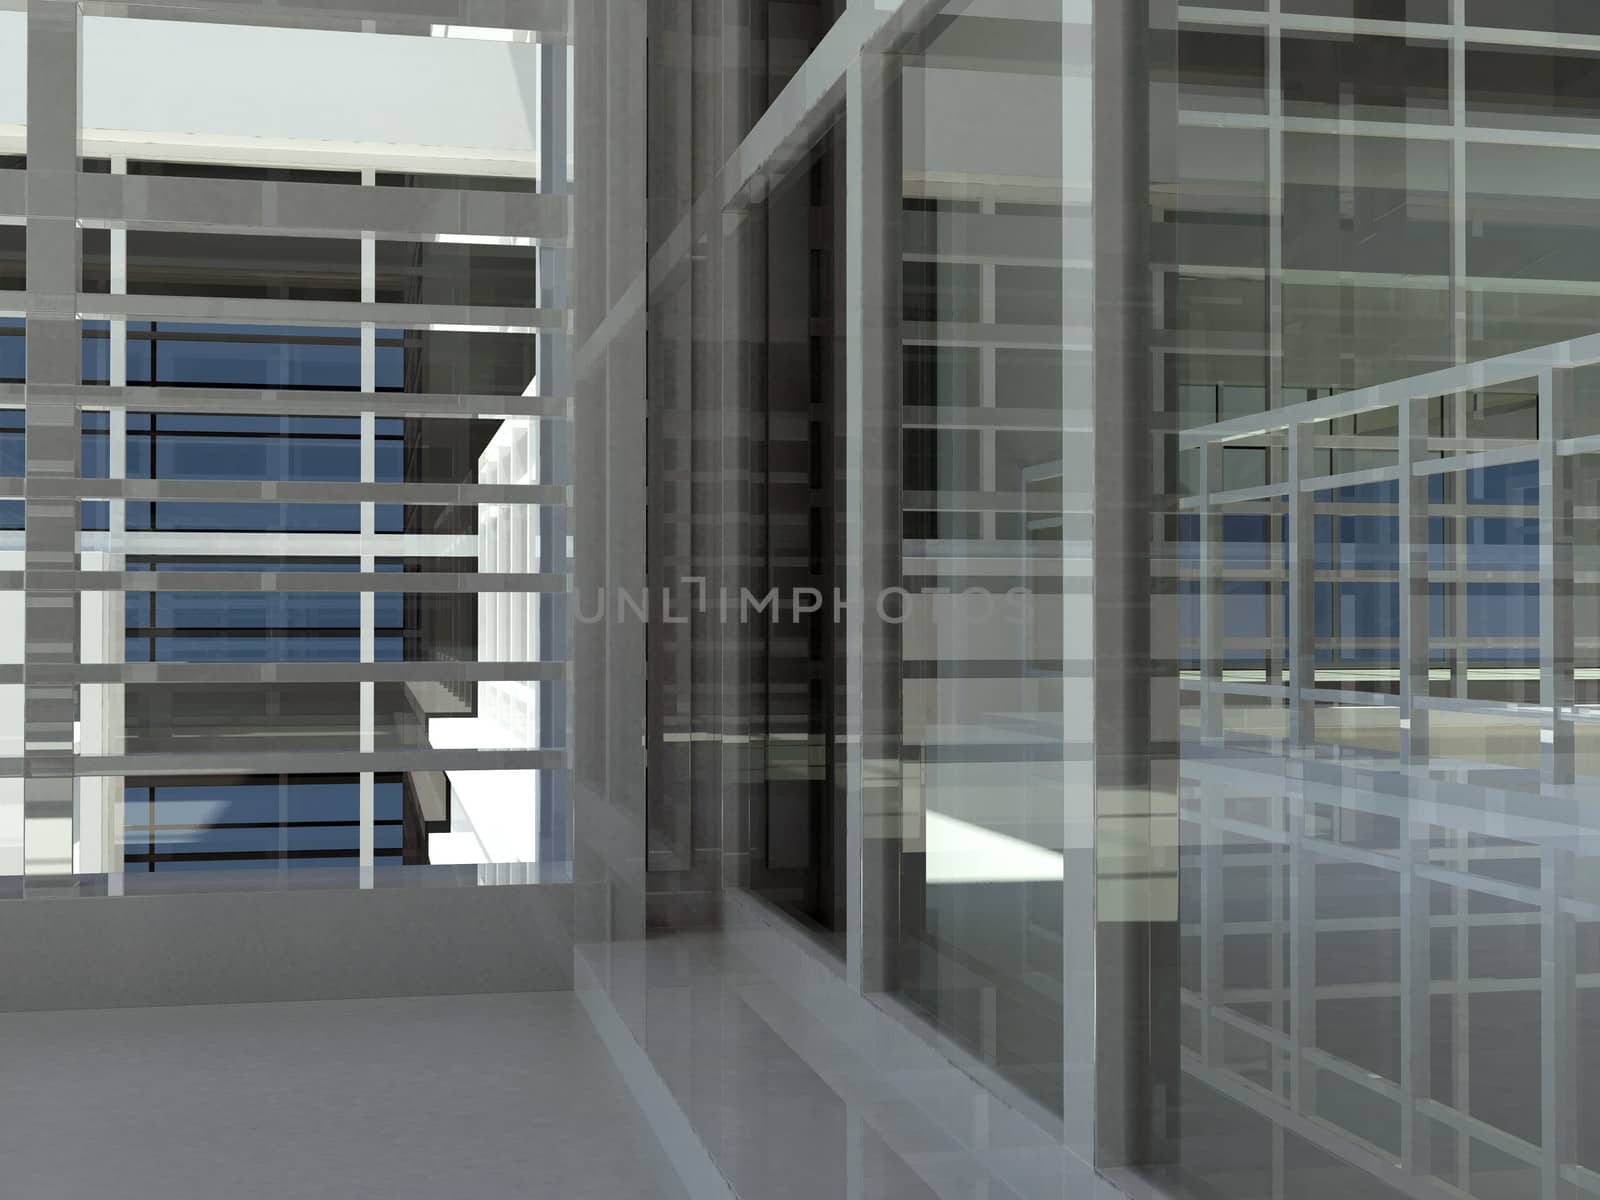 Architecture: staircase and windows. 3d render. Interior